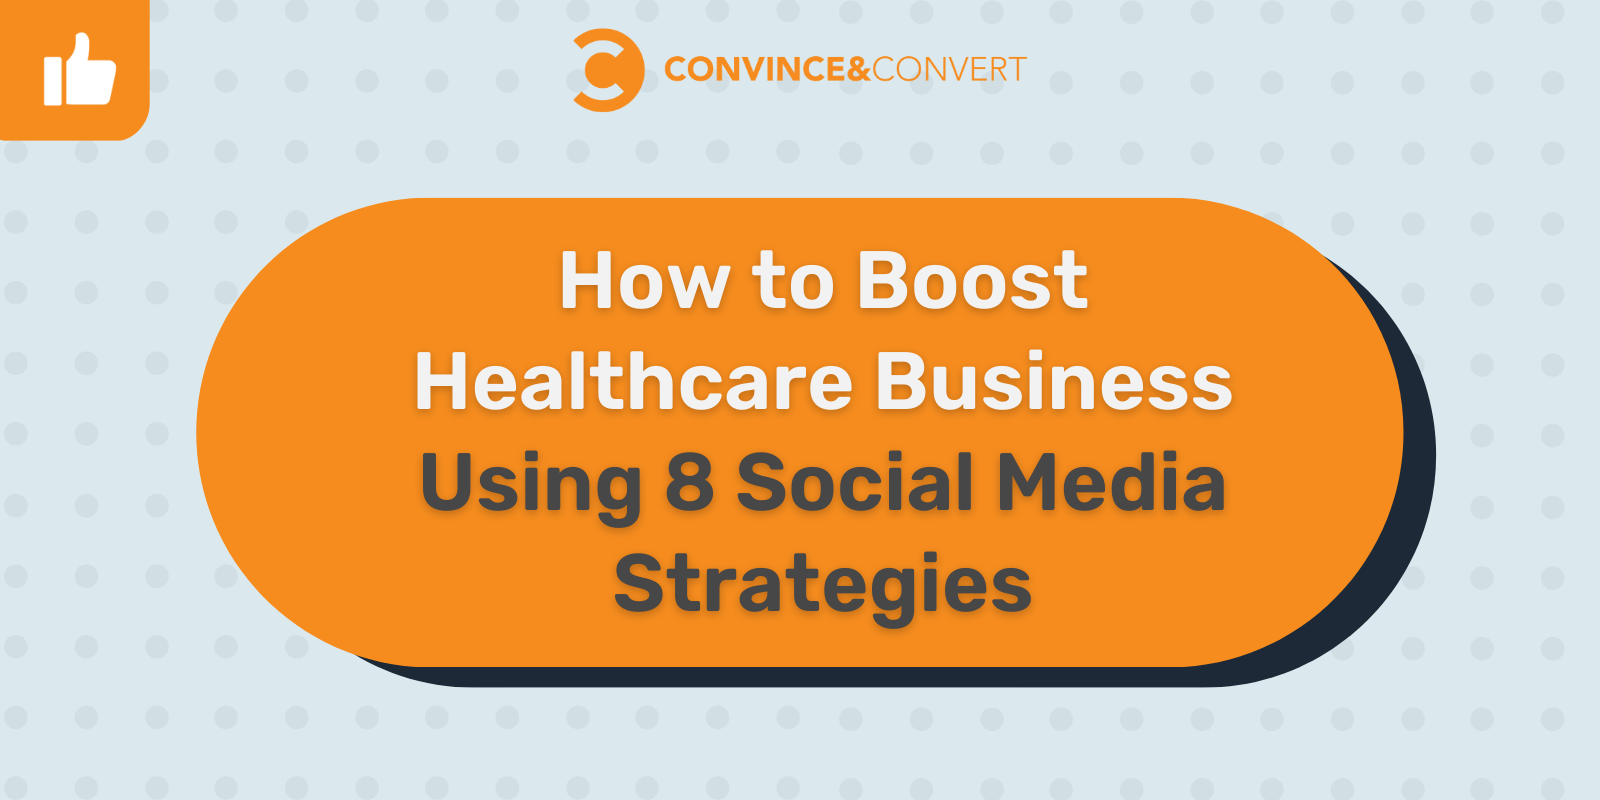 How to Boost Healthcare Business Using 8 Social Media Strategies